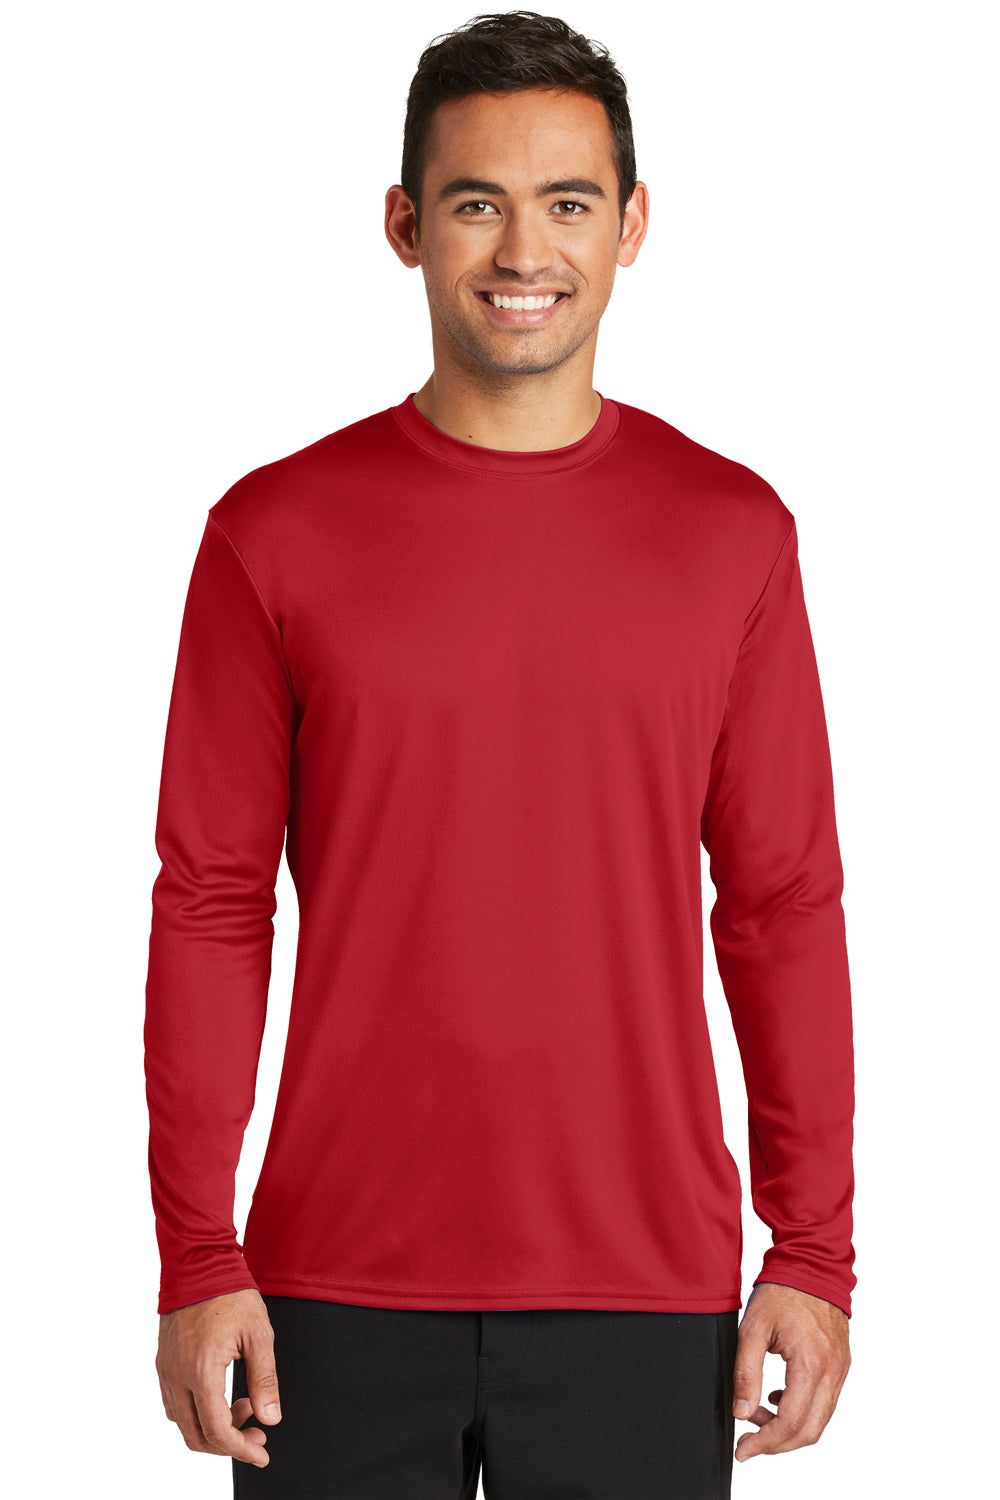 Port & Company PC380LS Mens Dry Zone Performance Moisture Wicking Long Sleeve Crewneck T-Shirt Red Front